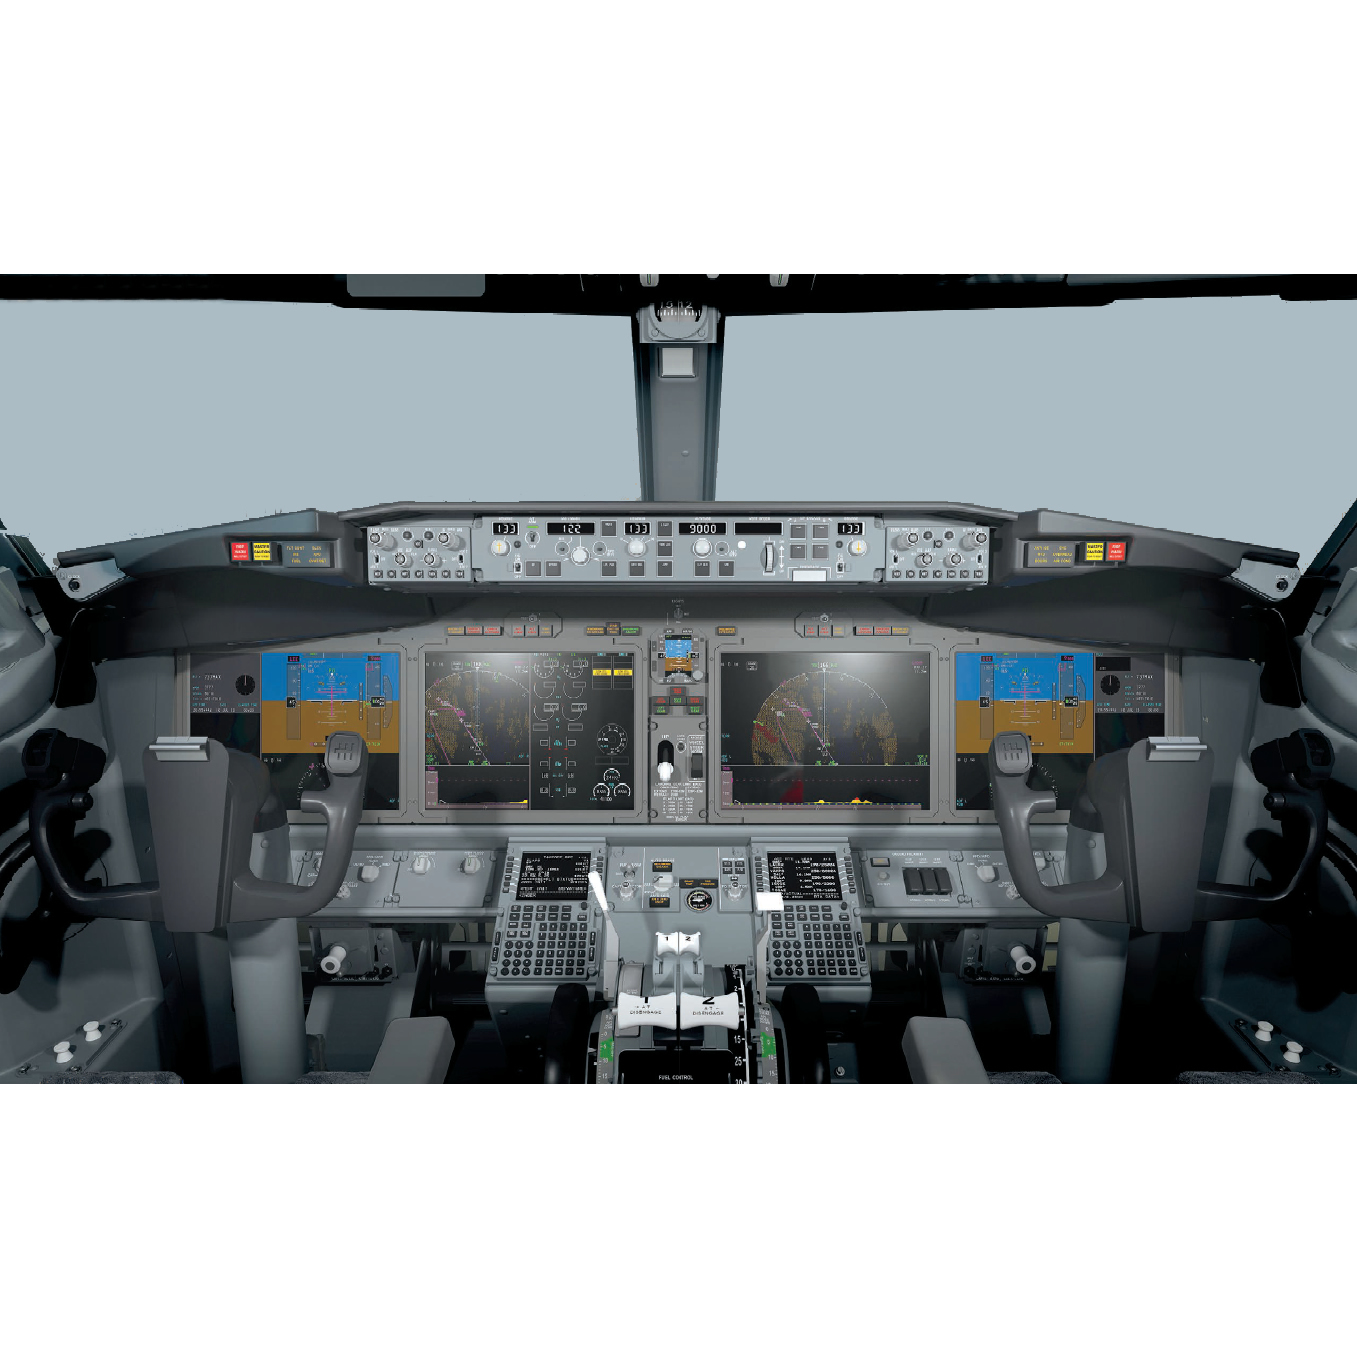 /templates/pbsim/images/products/Boeing-737-max.jpg